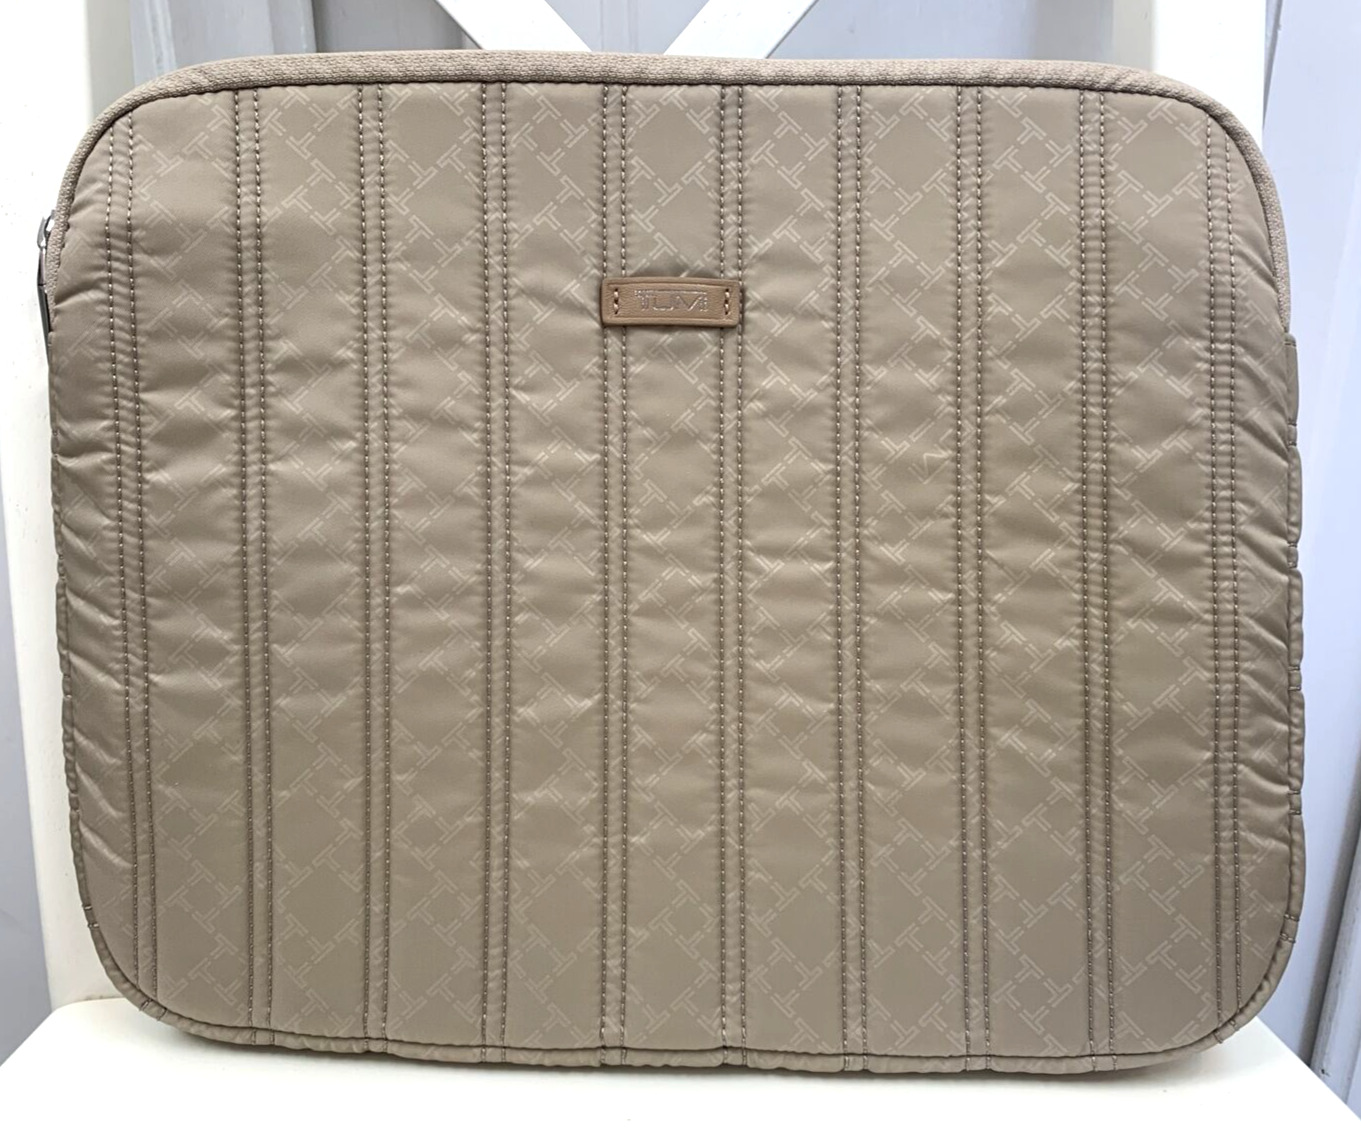 TUMI Laptop iPad Tablet Quilted Cover - Beige -NWOT